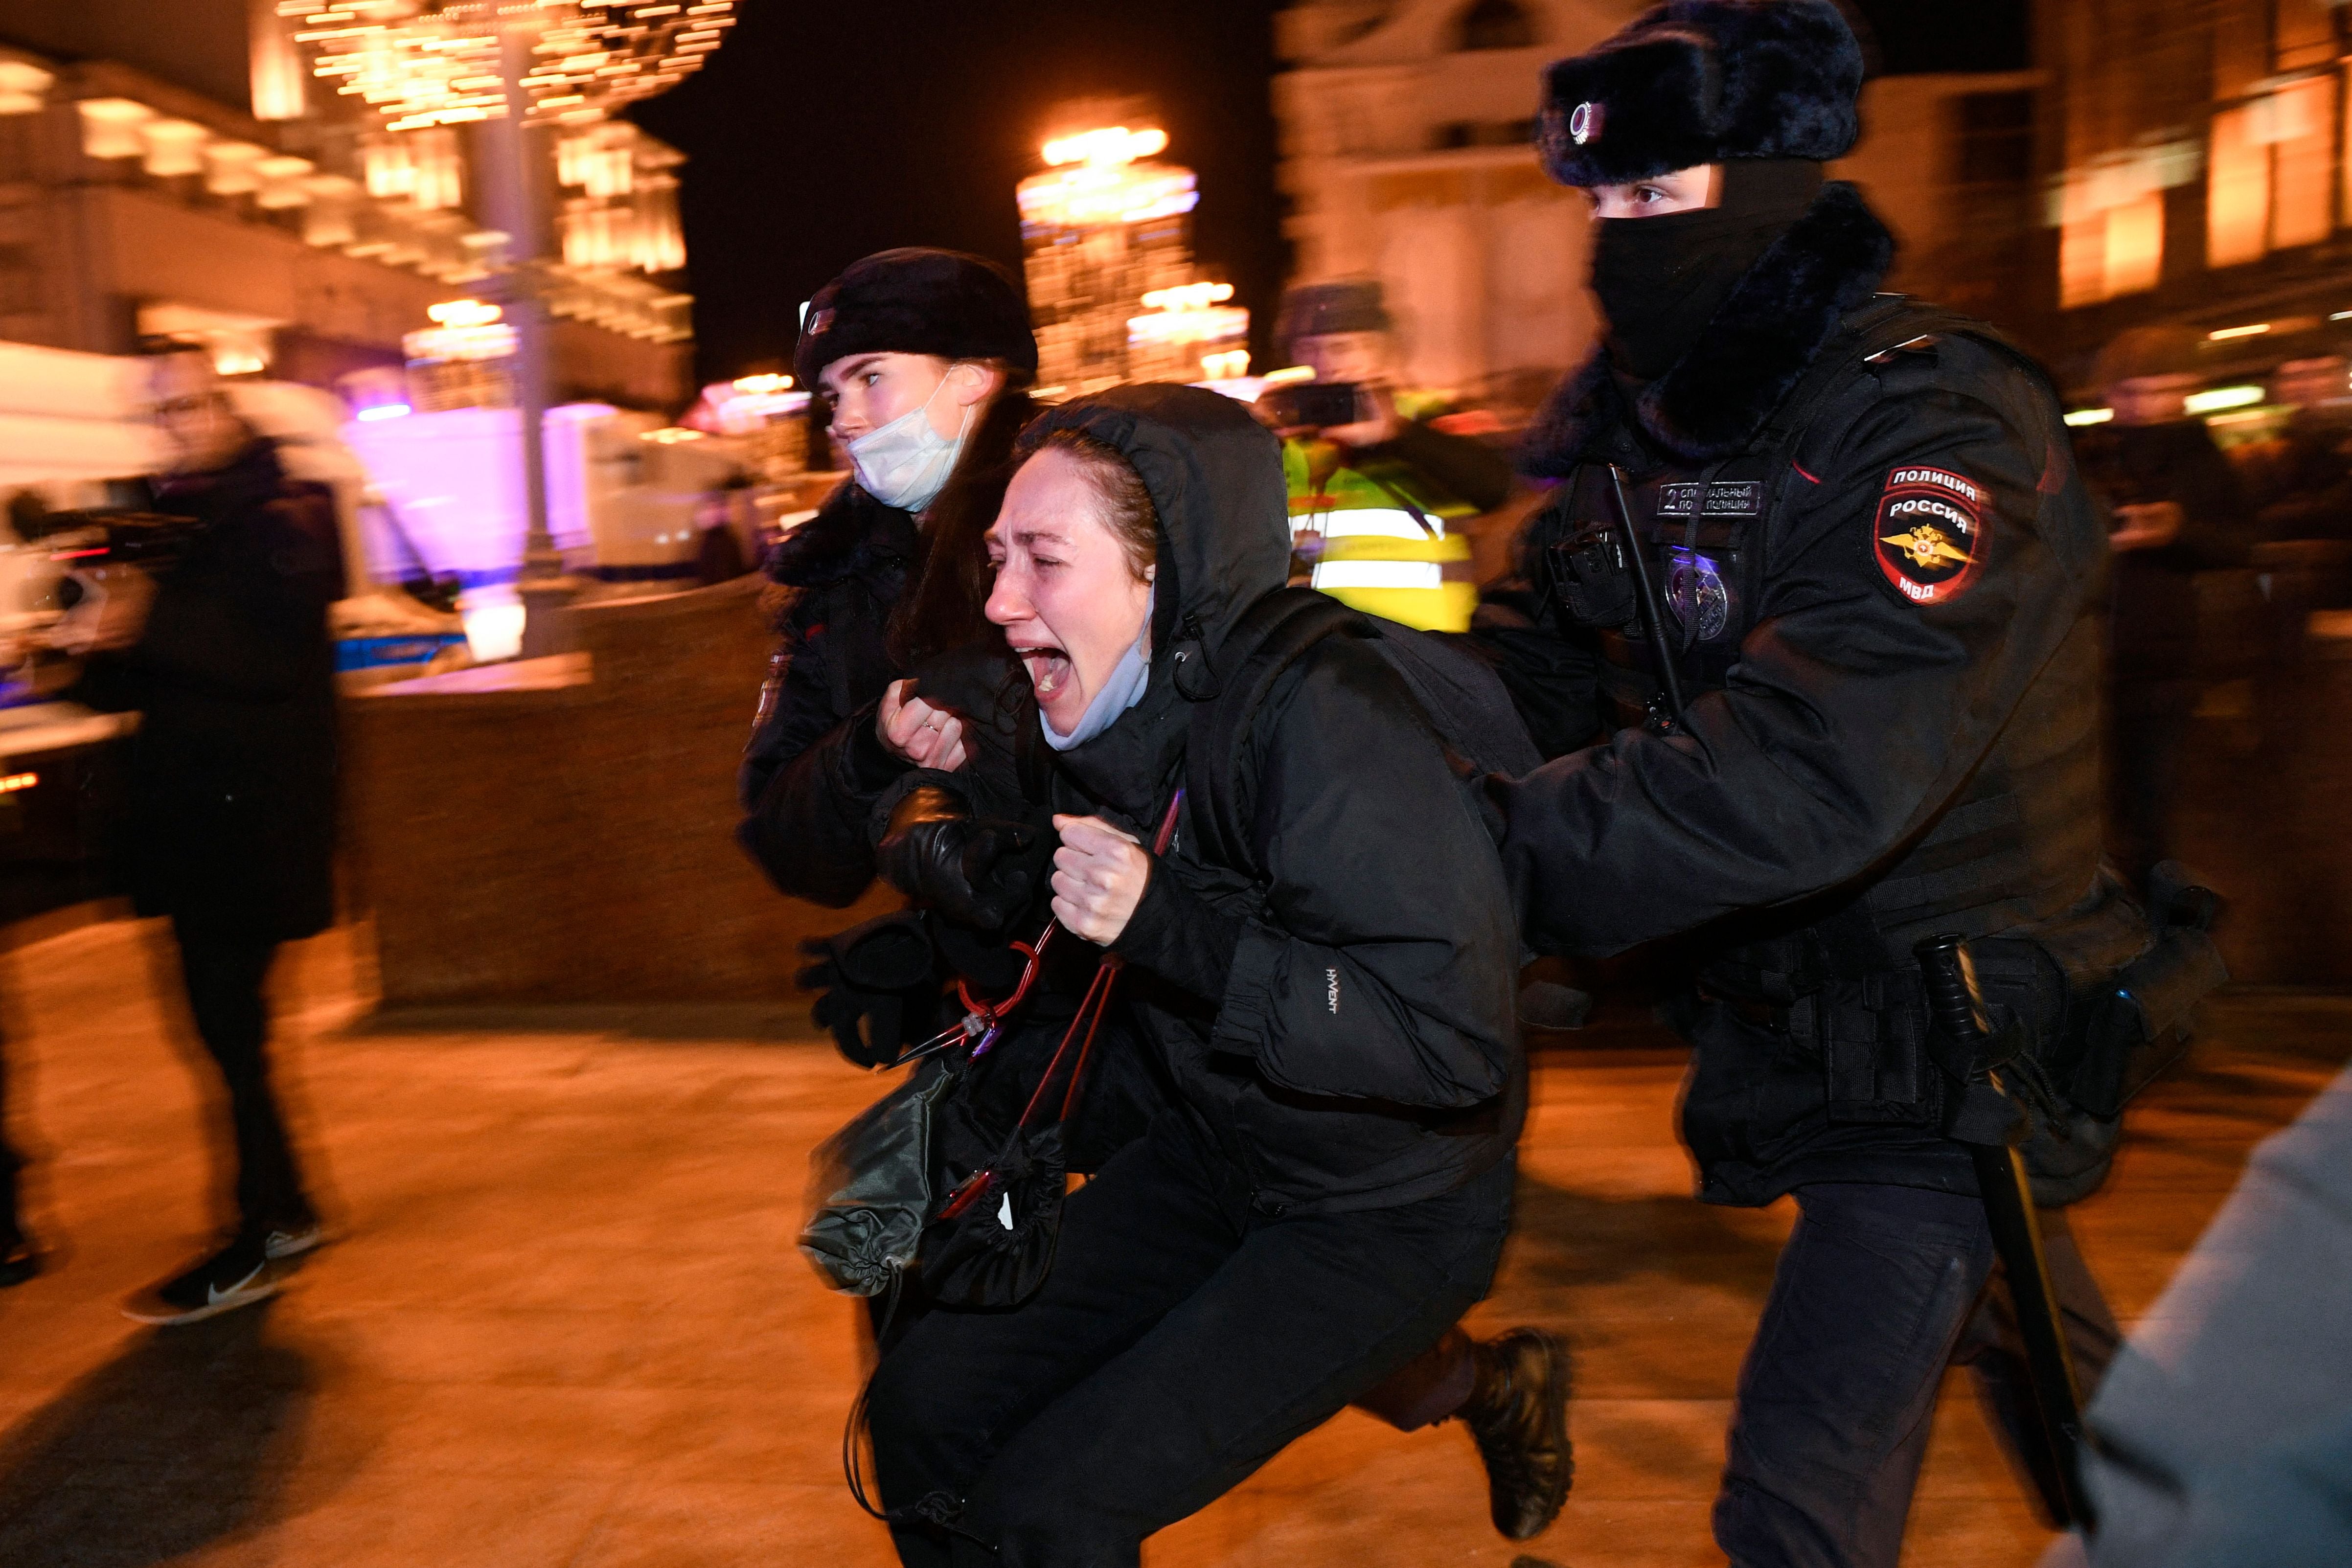 Police officers detain a demonstrator during a protest against Russia’s invasion of Ukraine in Moscow on 24 February